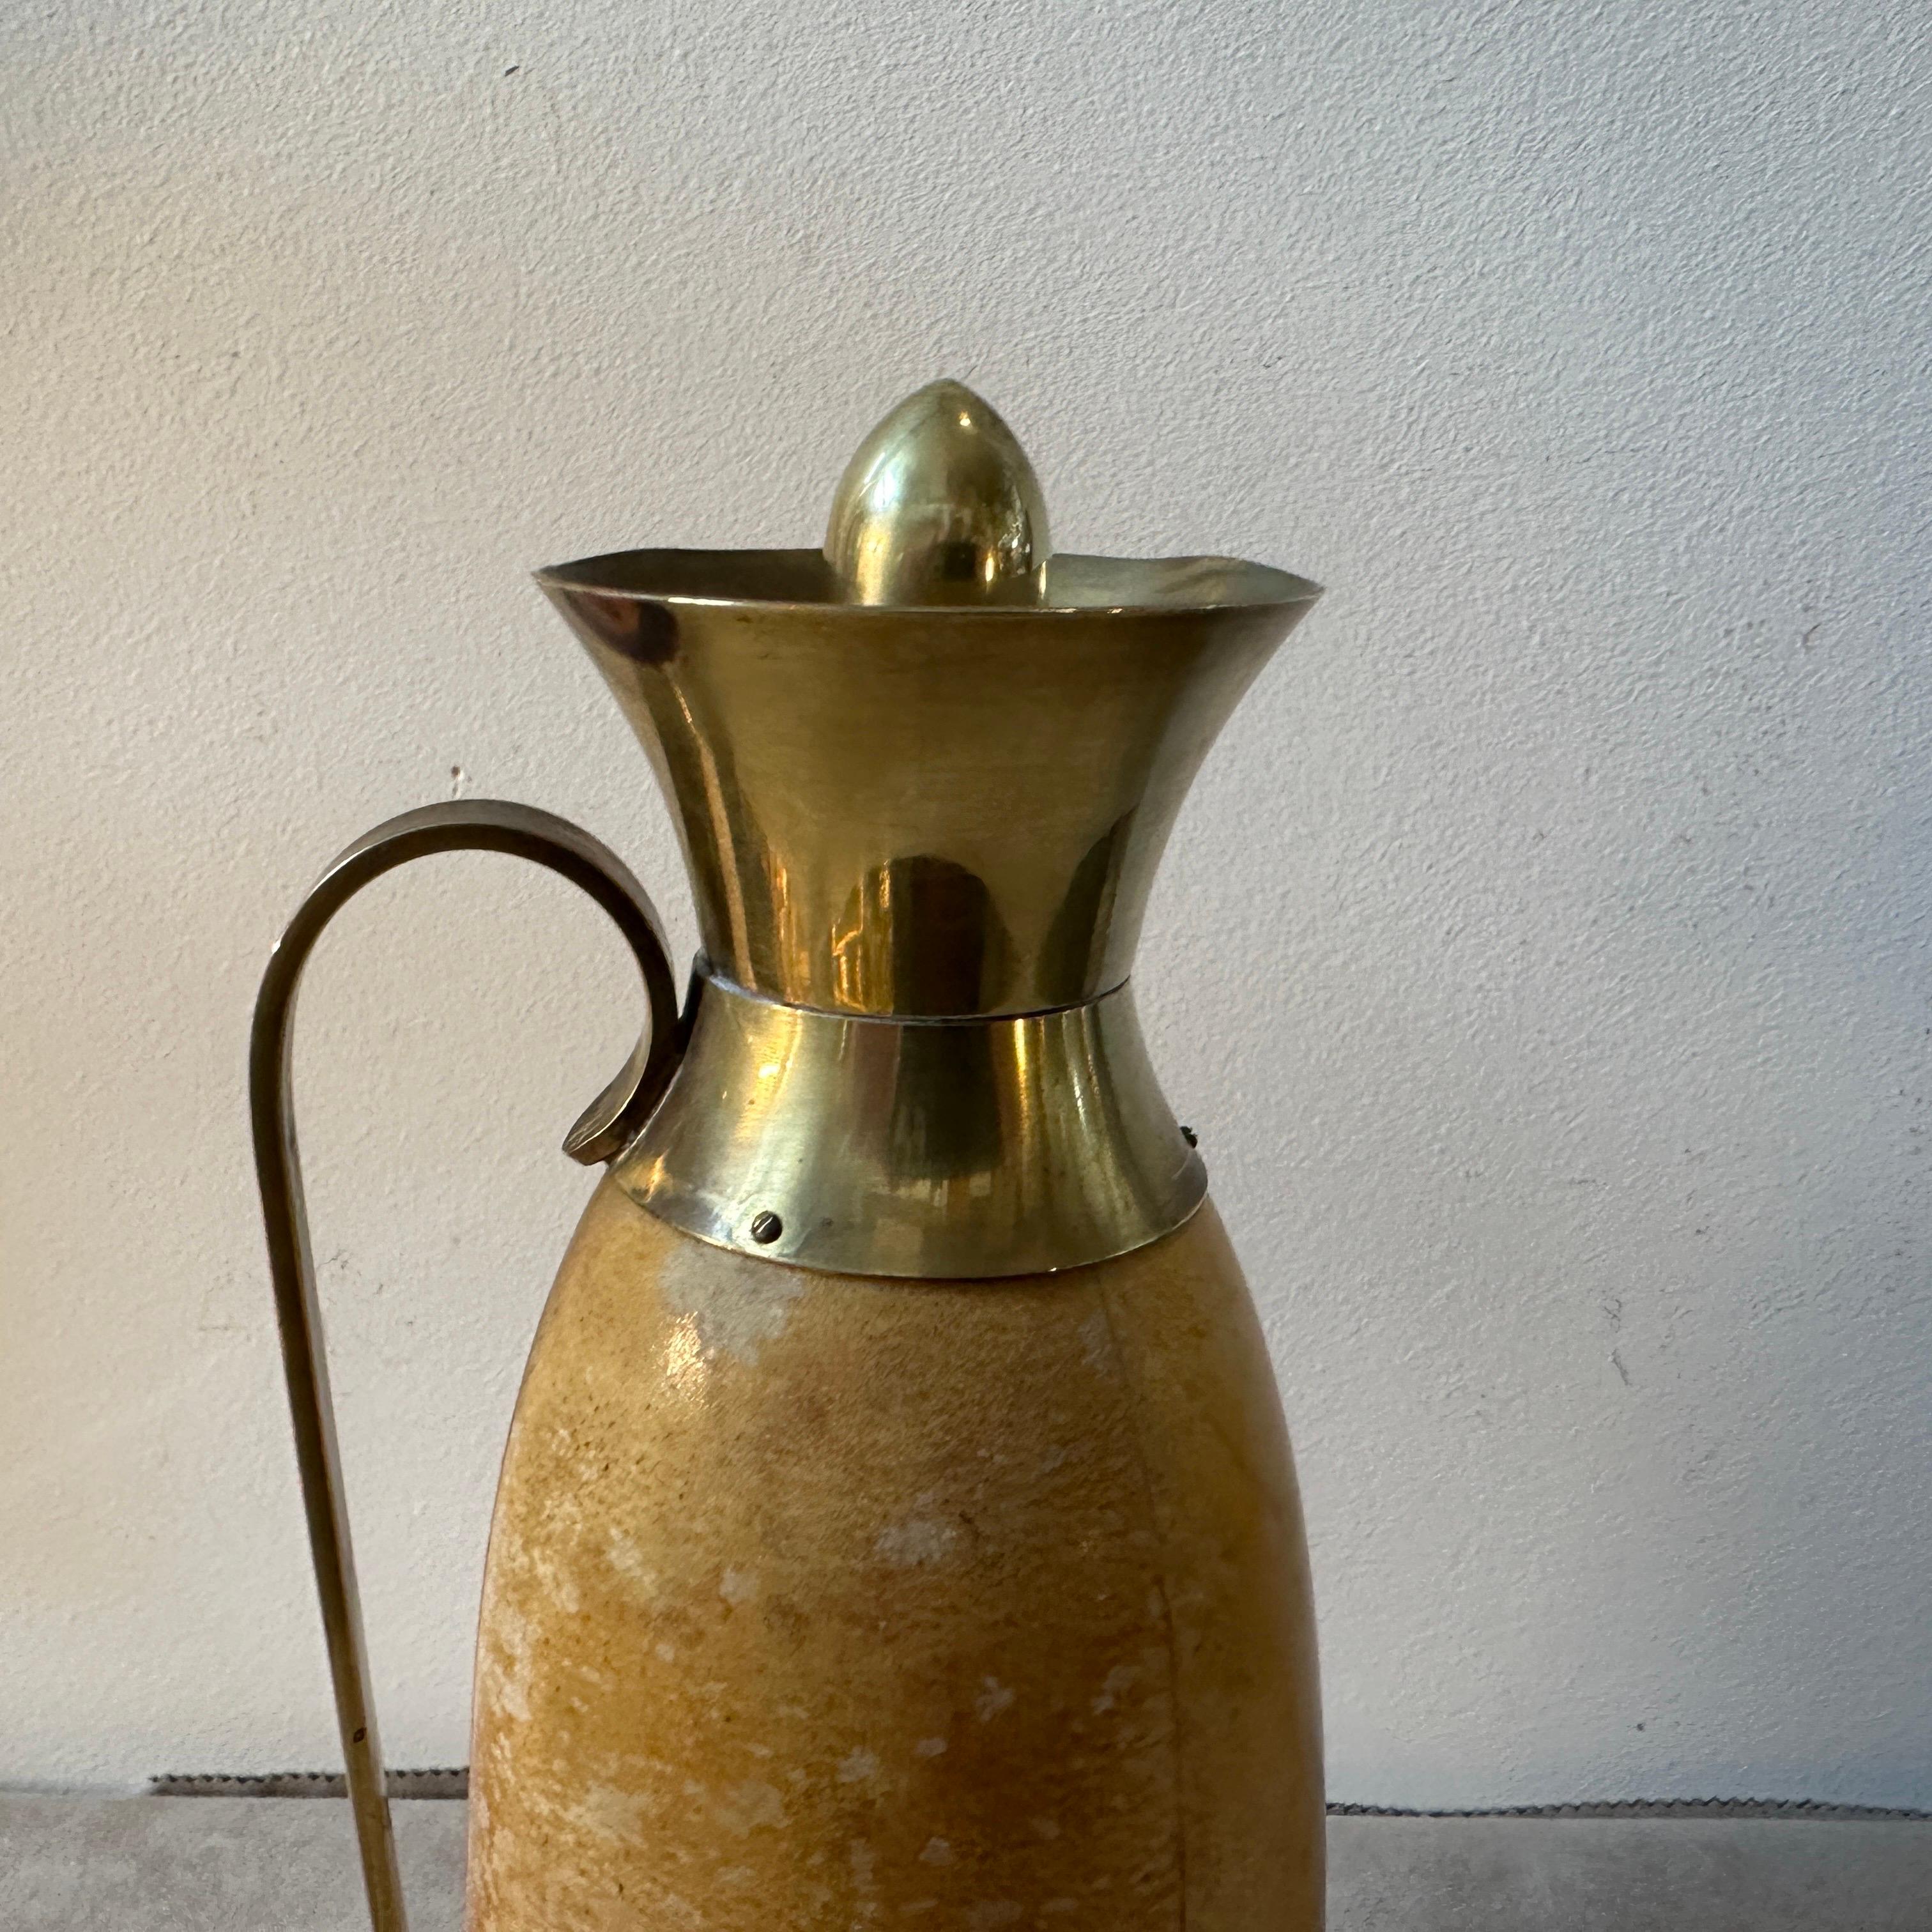 Italian 1950s Mid-Century Modern Goatskin and Brass Thermos Carafe by Aldo Tura For Sale